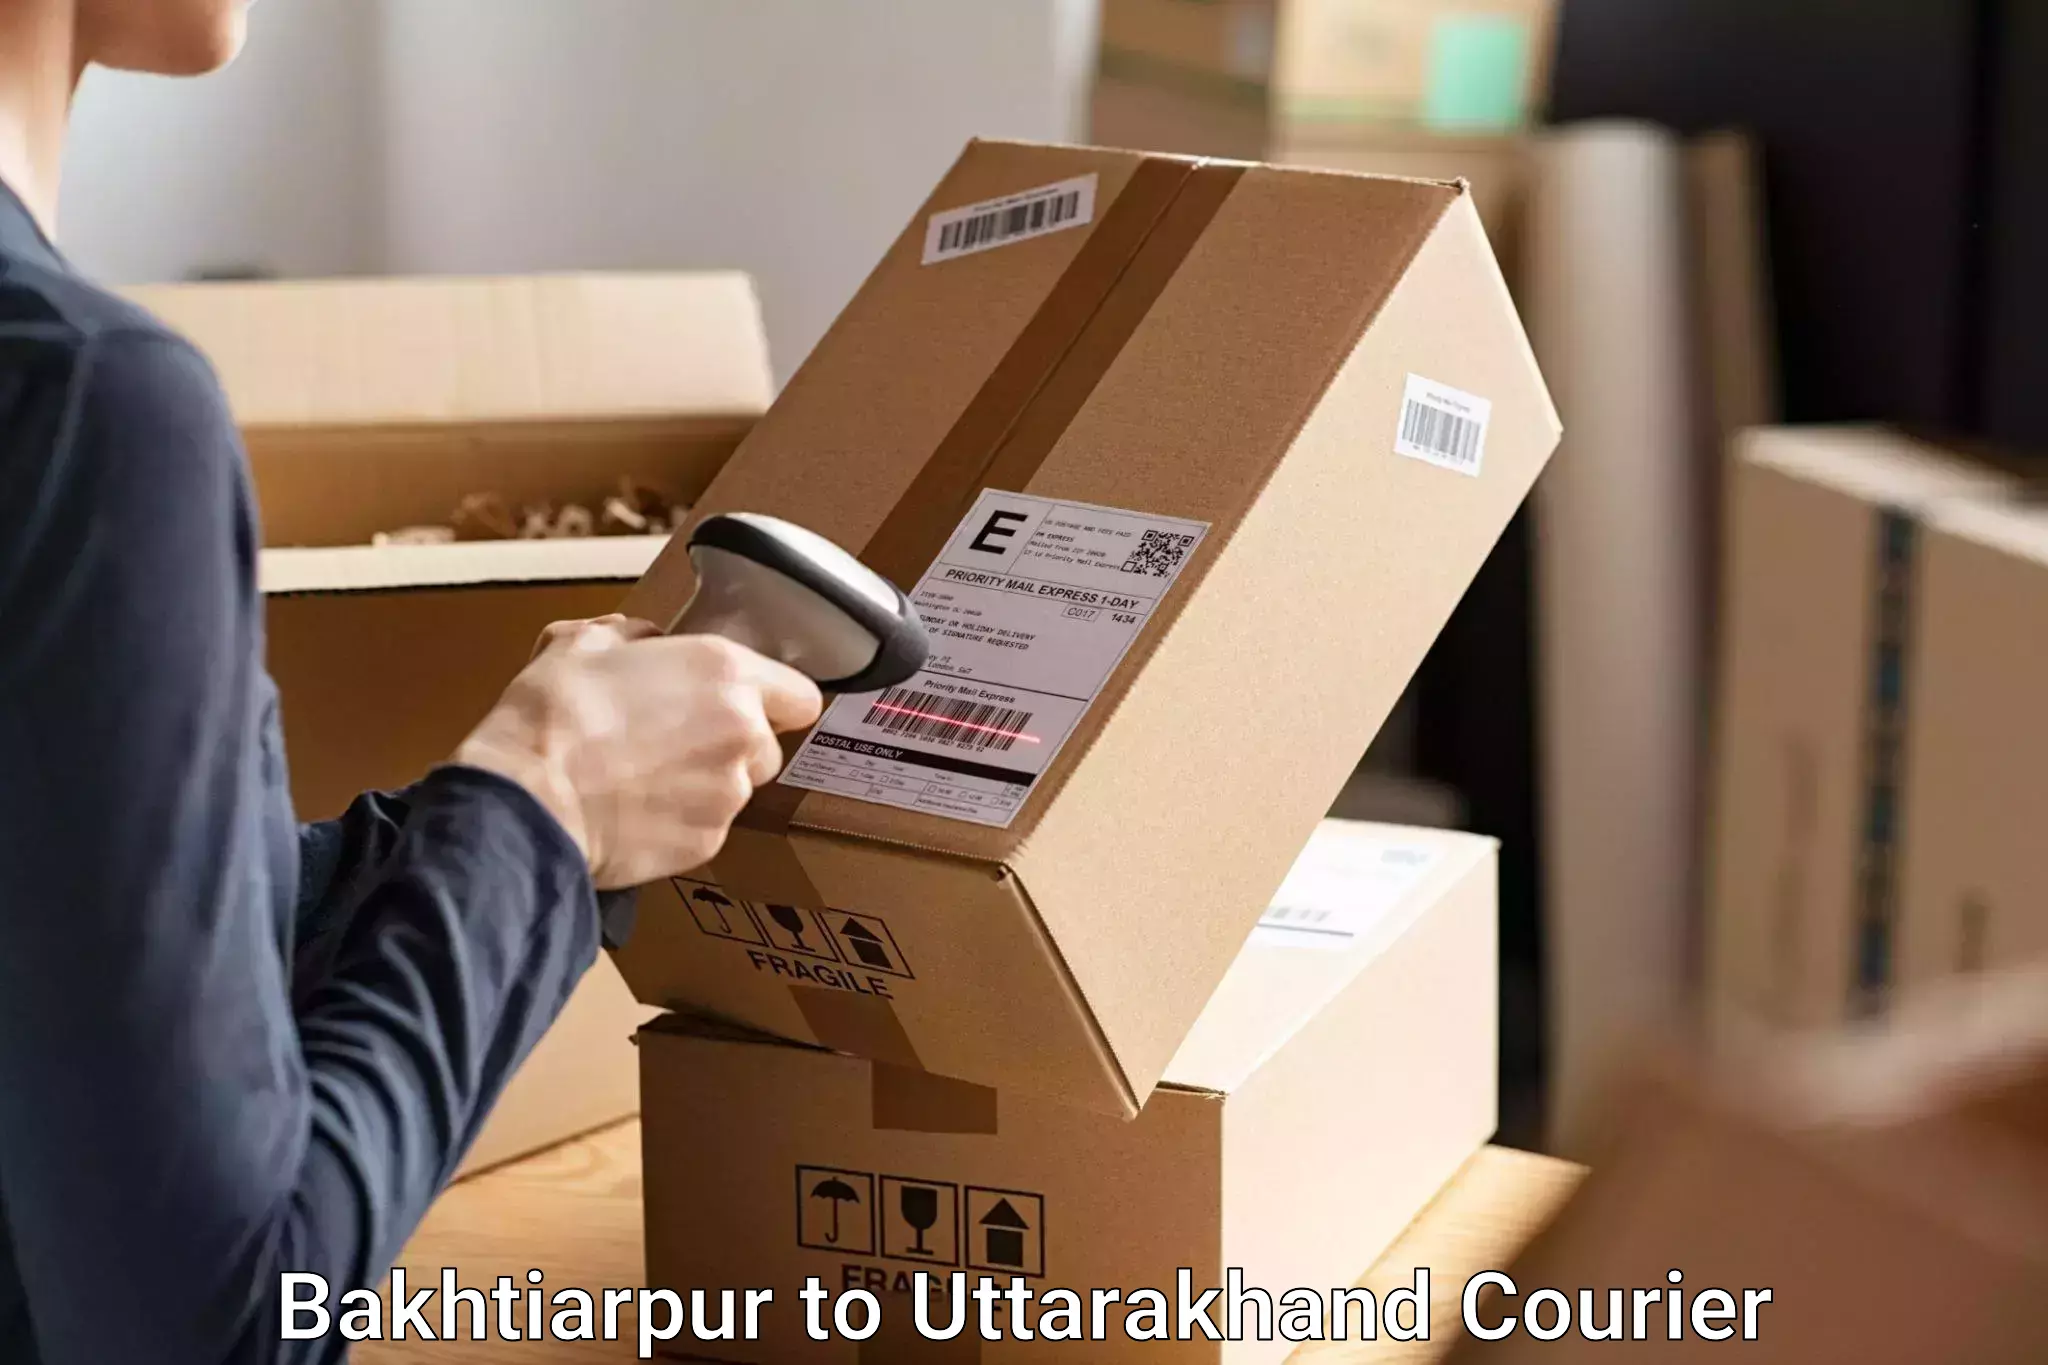 High-quality baggage shipment in Bakhtiarpur to NIT Garhwal